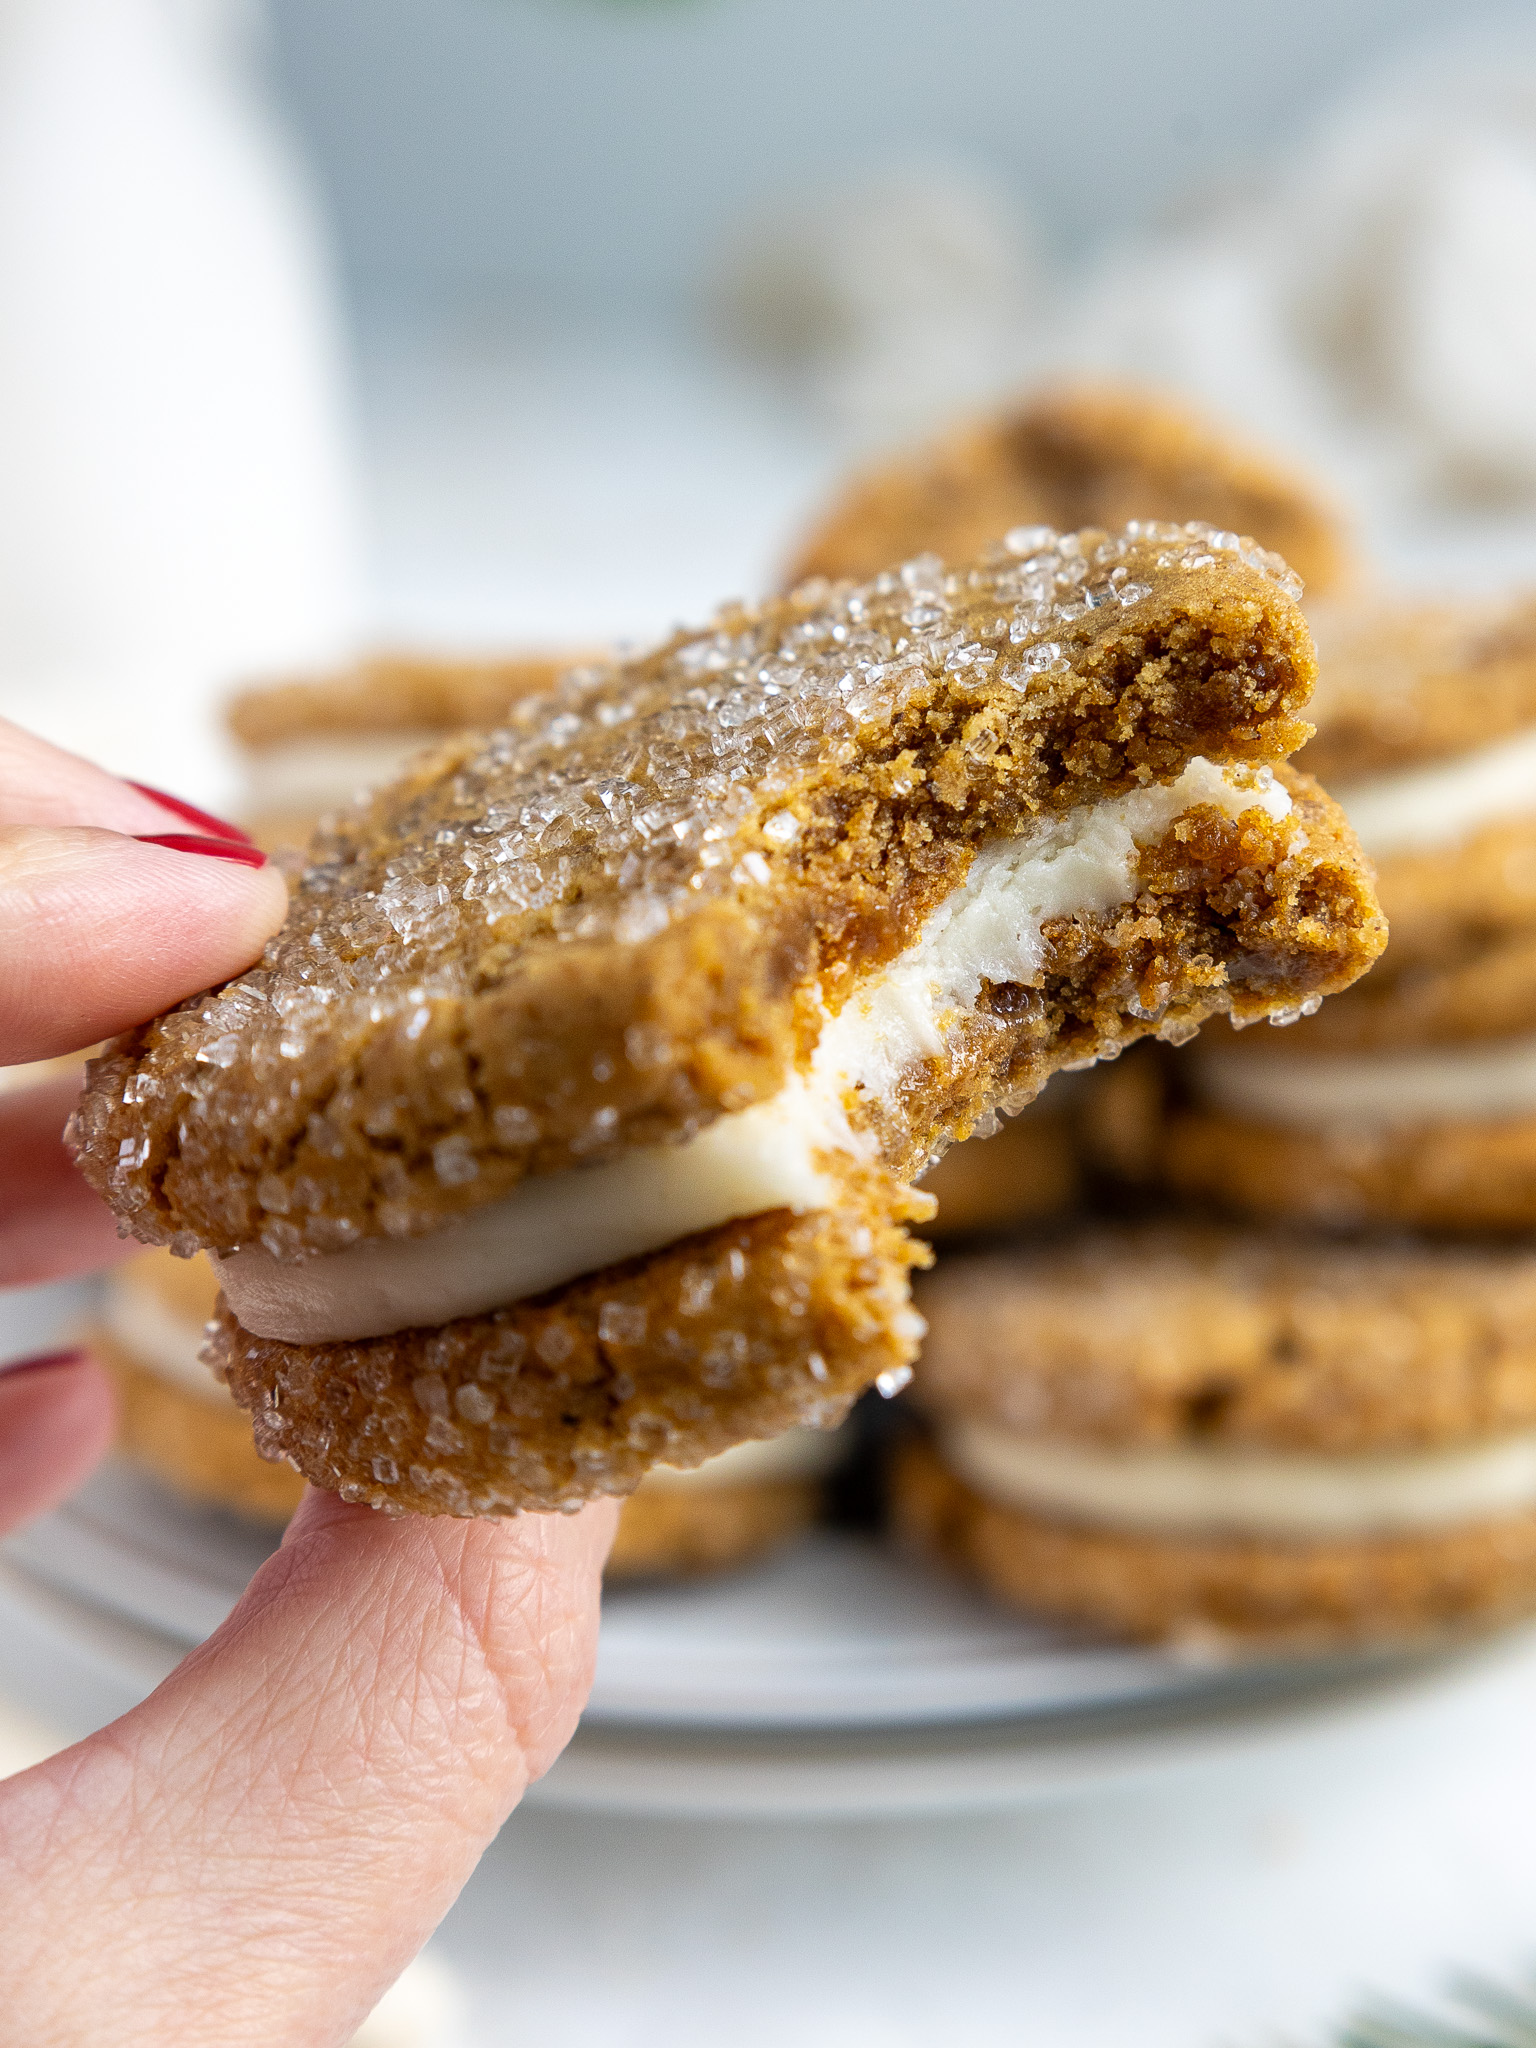 image of a gingerbread sandwich cookie that's been bitten into to show how soft and chewy it is